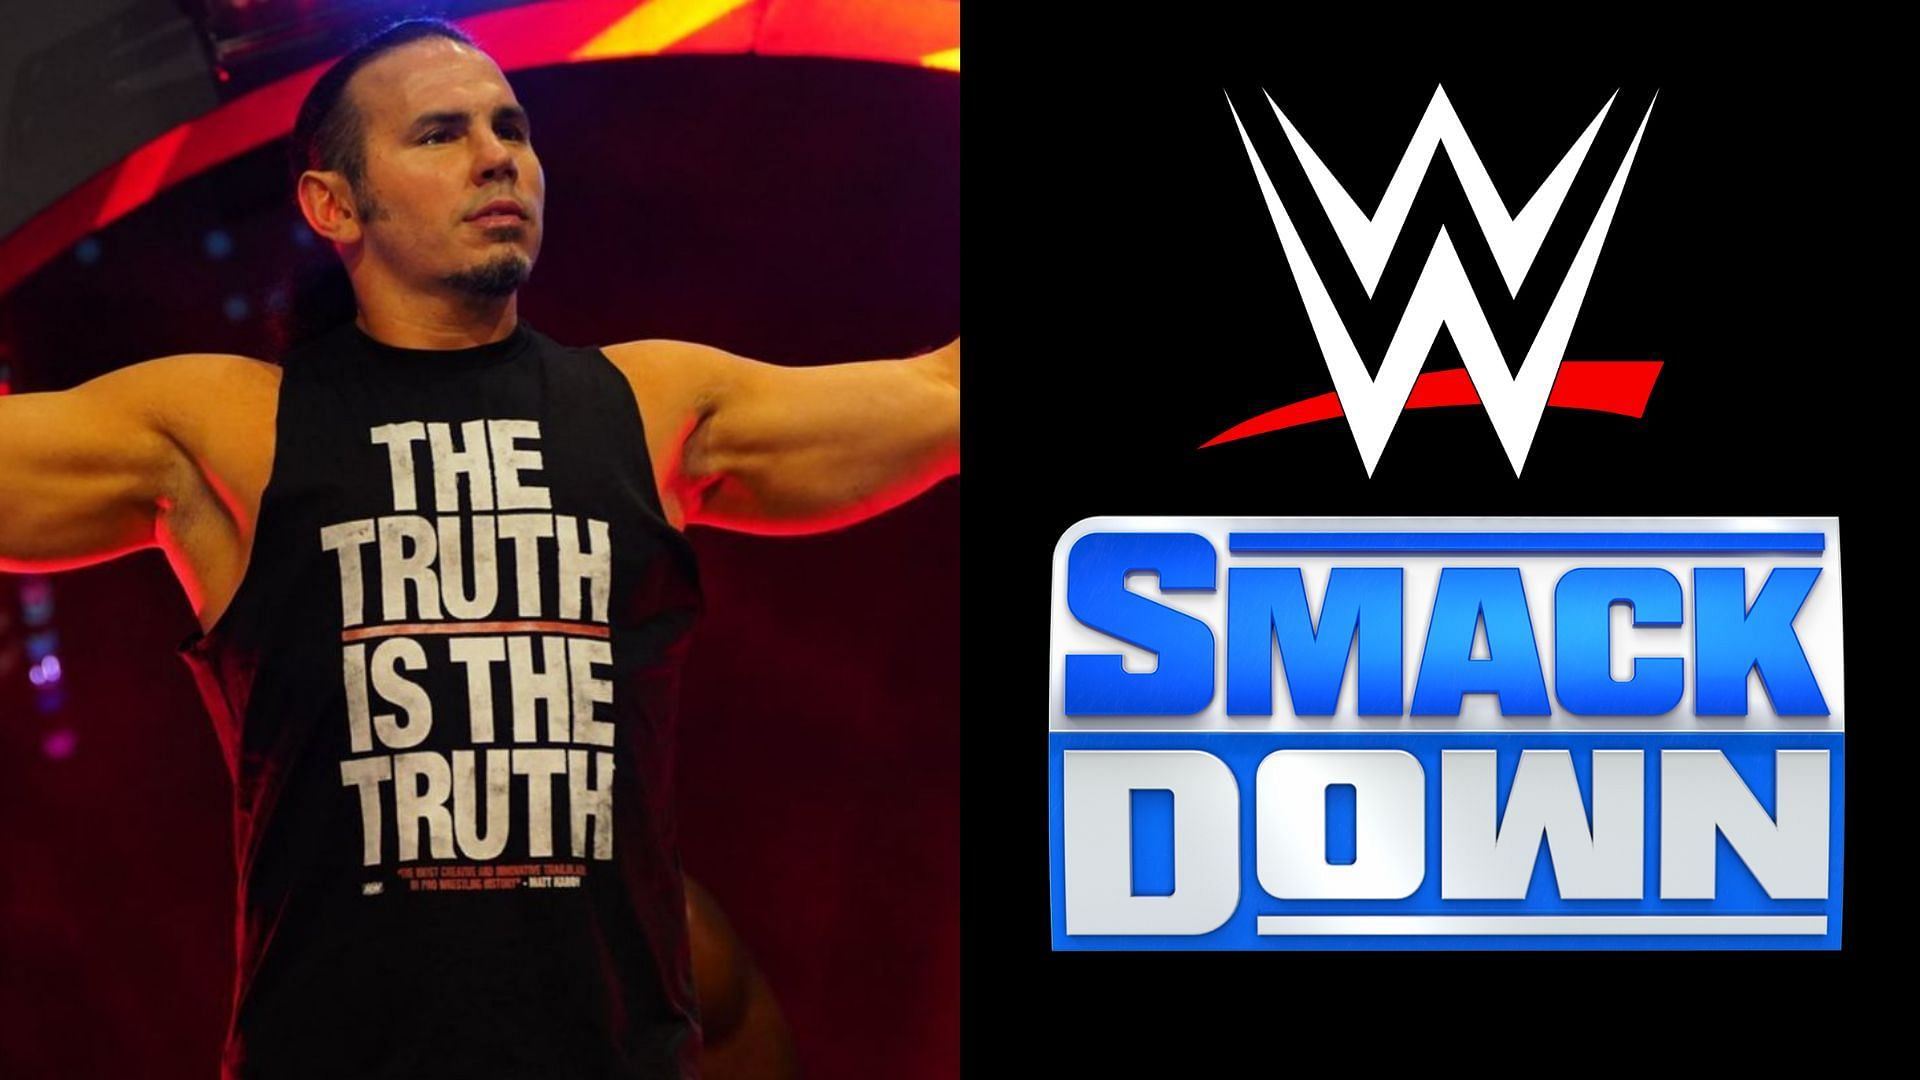 Matt Hardy had some impressive things to say about this star.